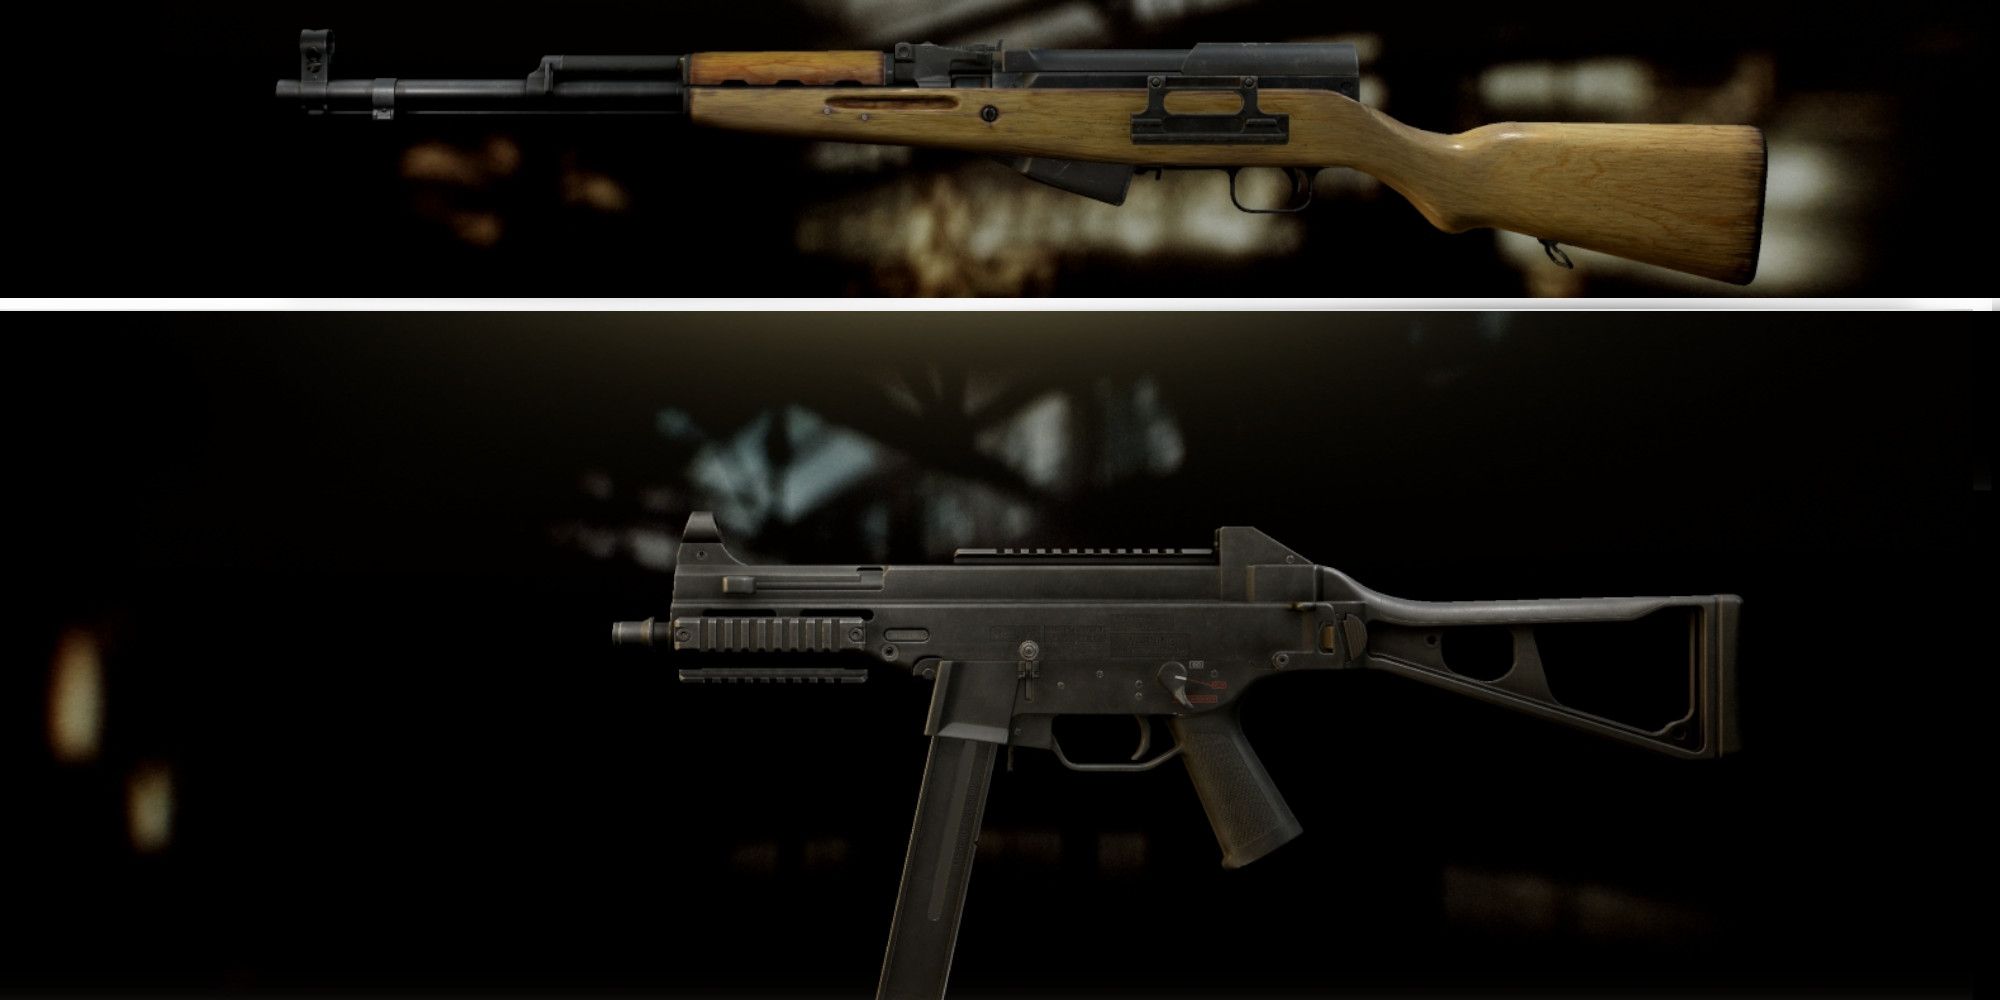 OP-SKS and UMP from Tarkov